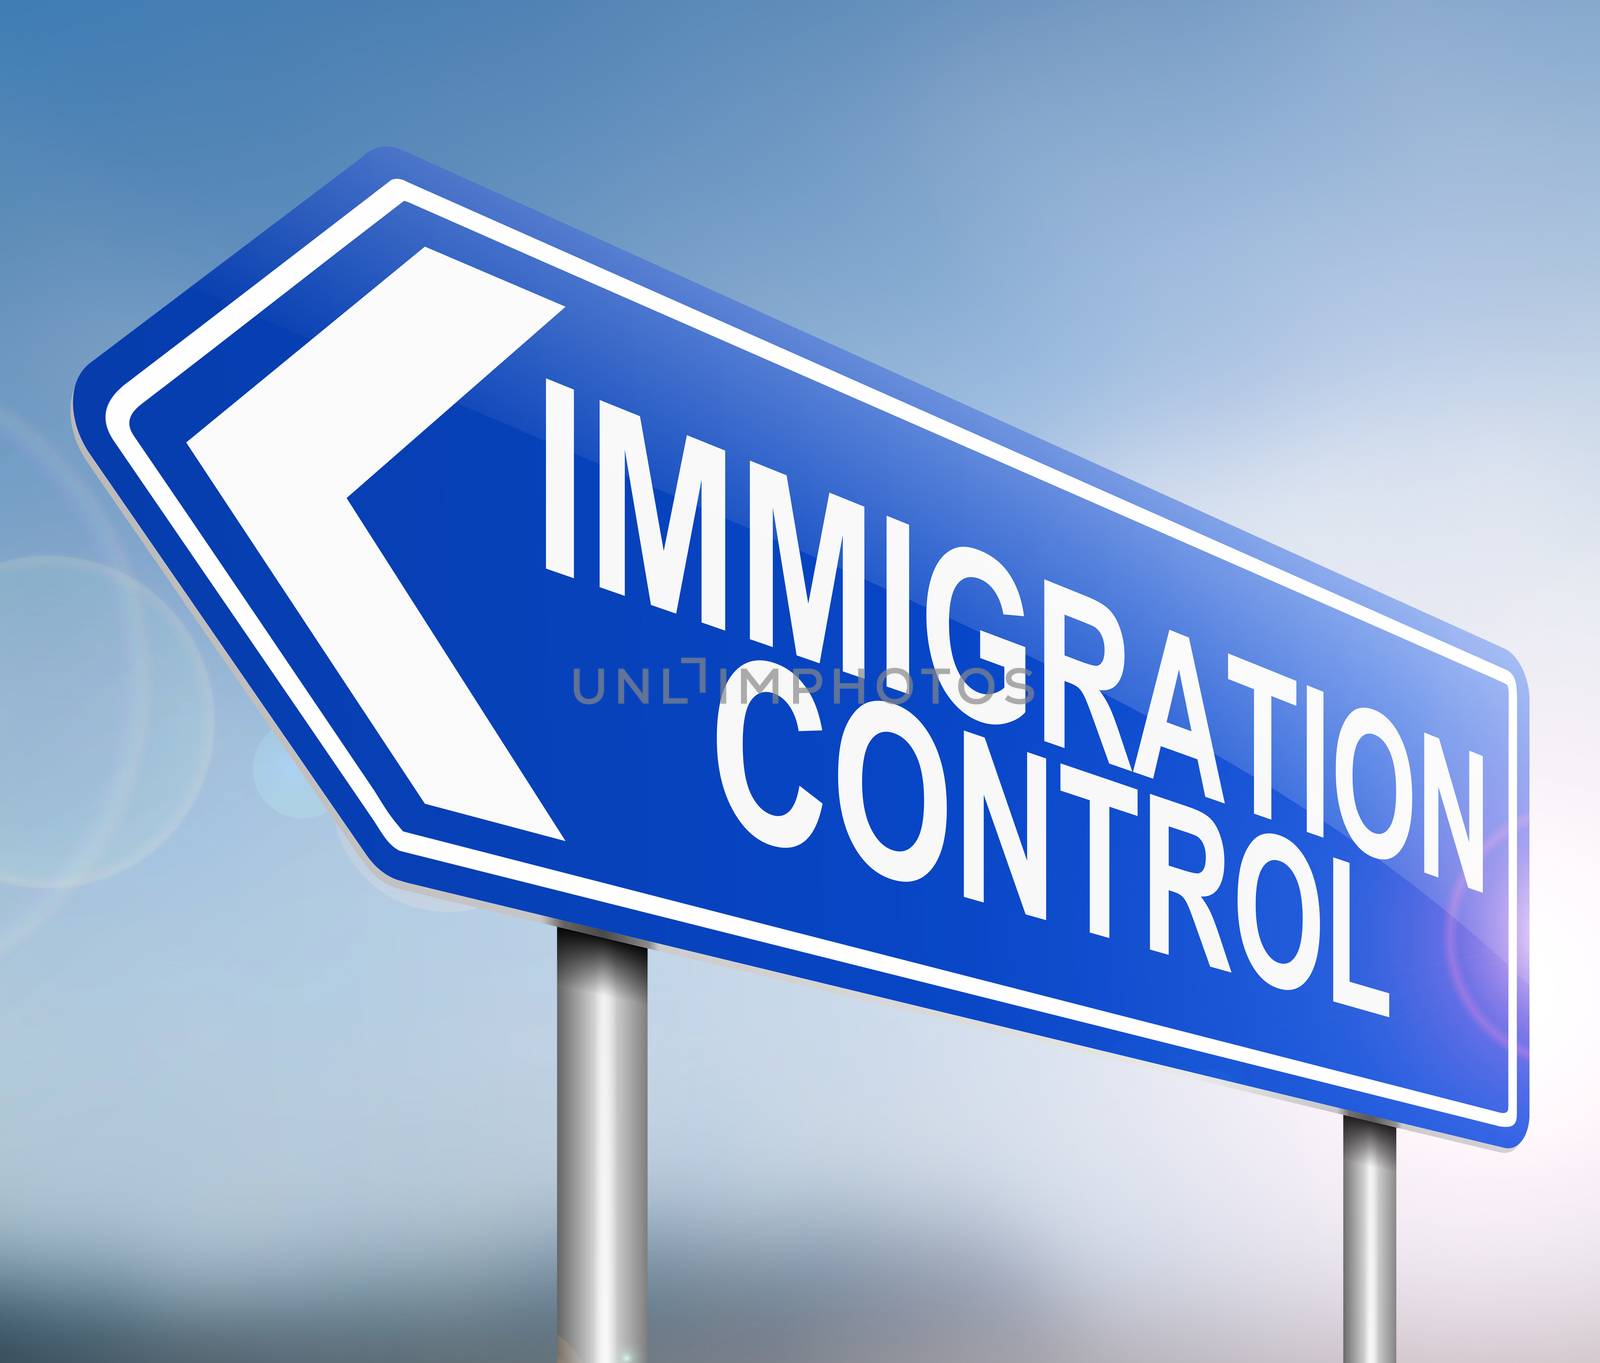 Illustration depicting a sign with an immigration control concept.